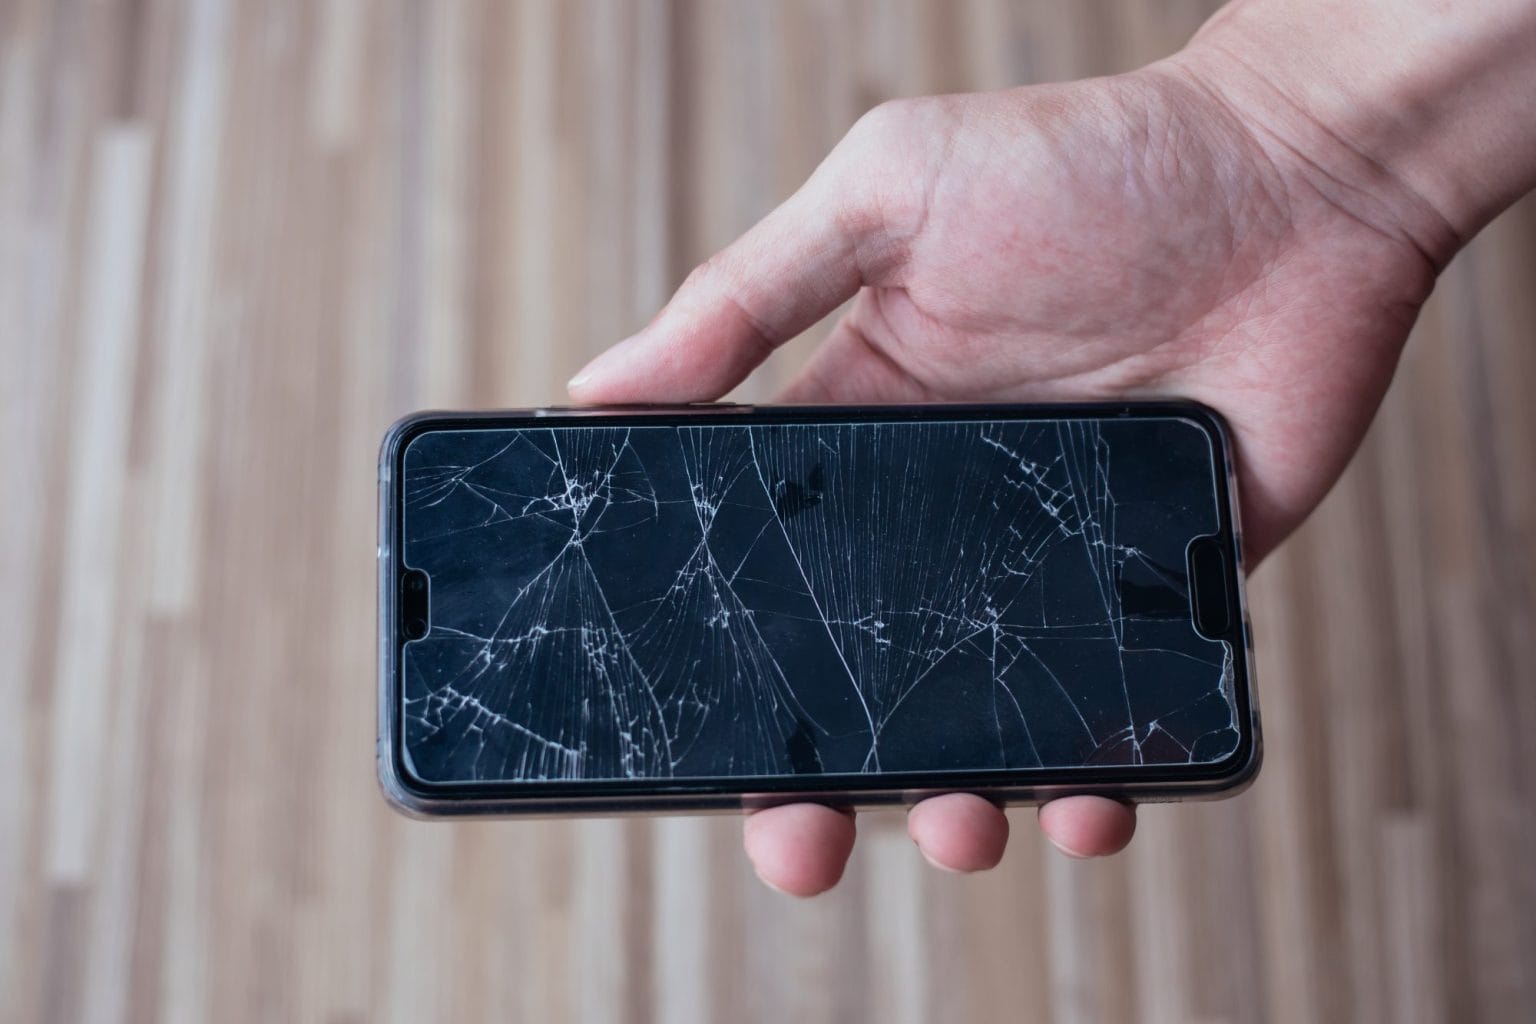 Close-up of human hand holding a broken and damaged glass of mobile phone from accident.